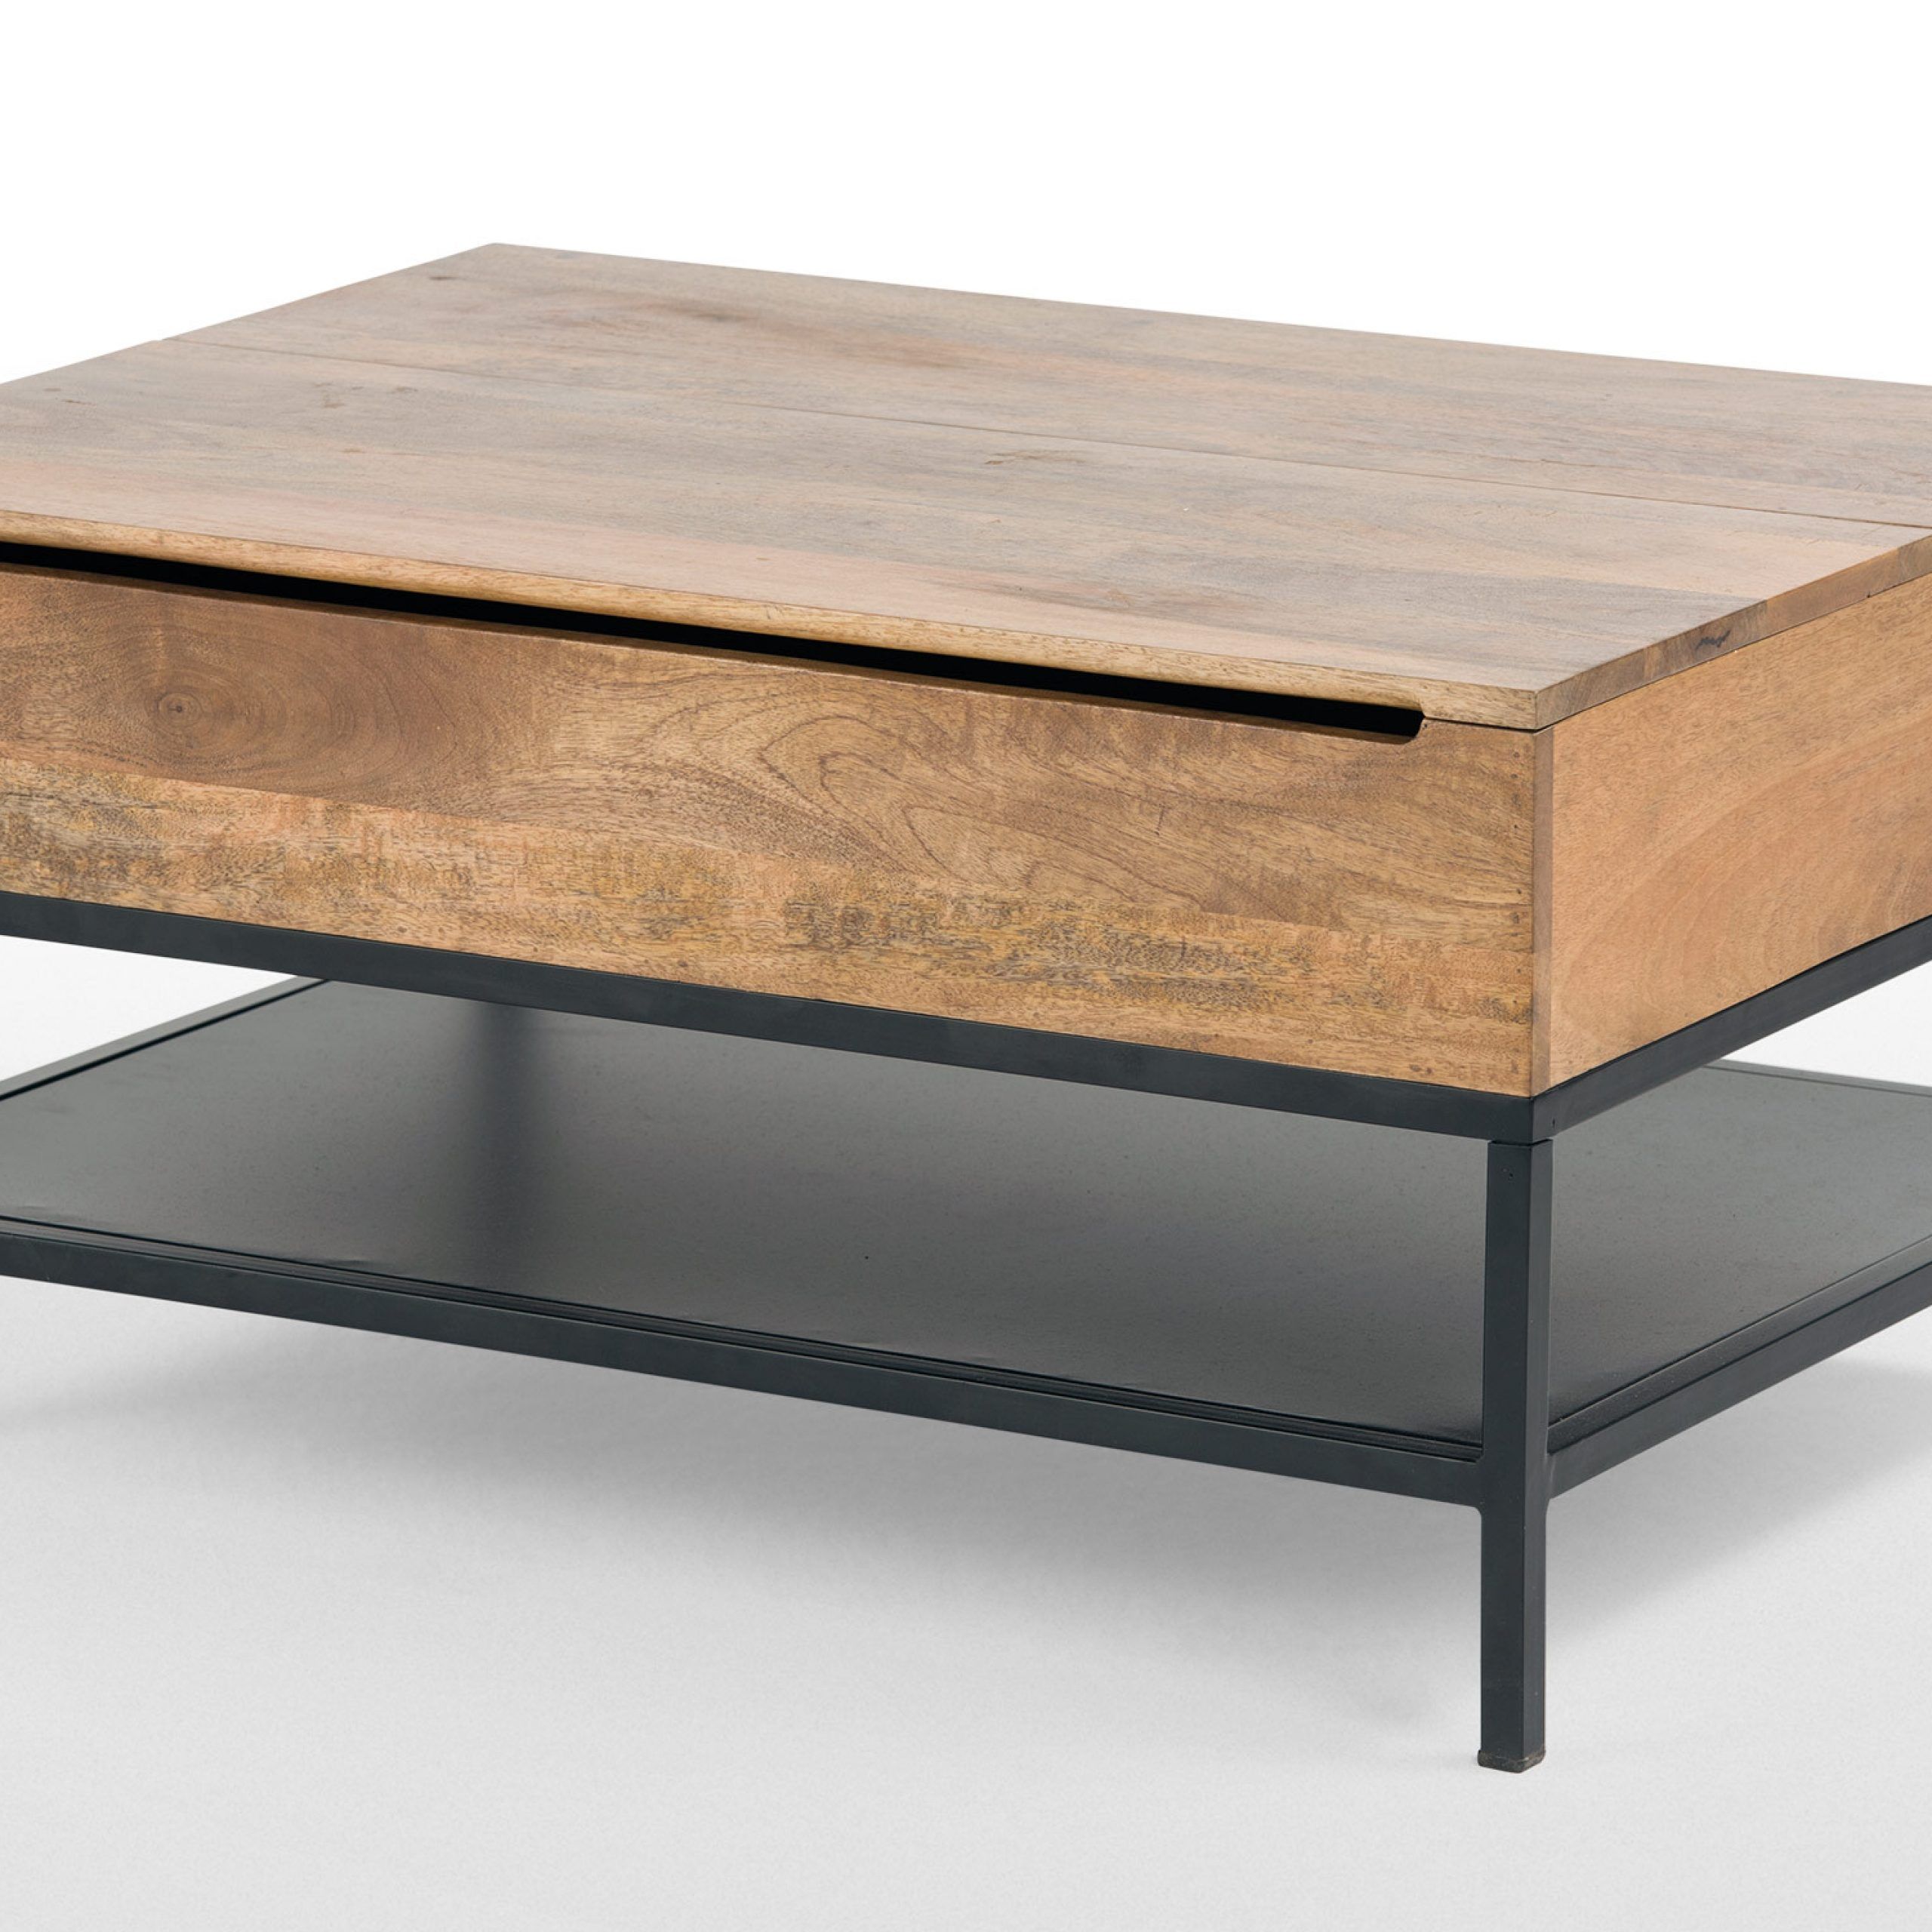 Lomond Lift Top Coffee Table With Storage, Mango Wood And Black (View 7 of 10)